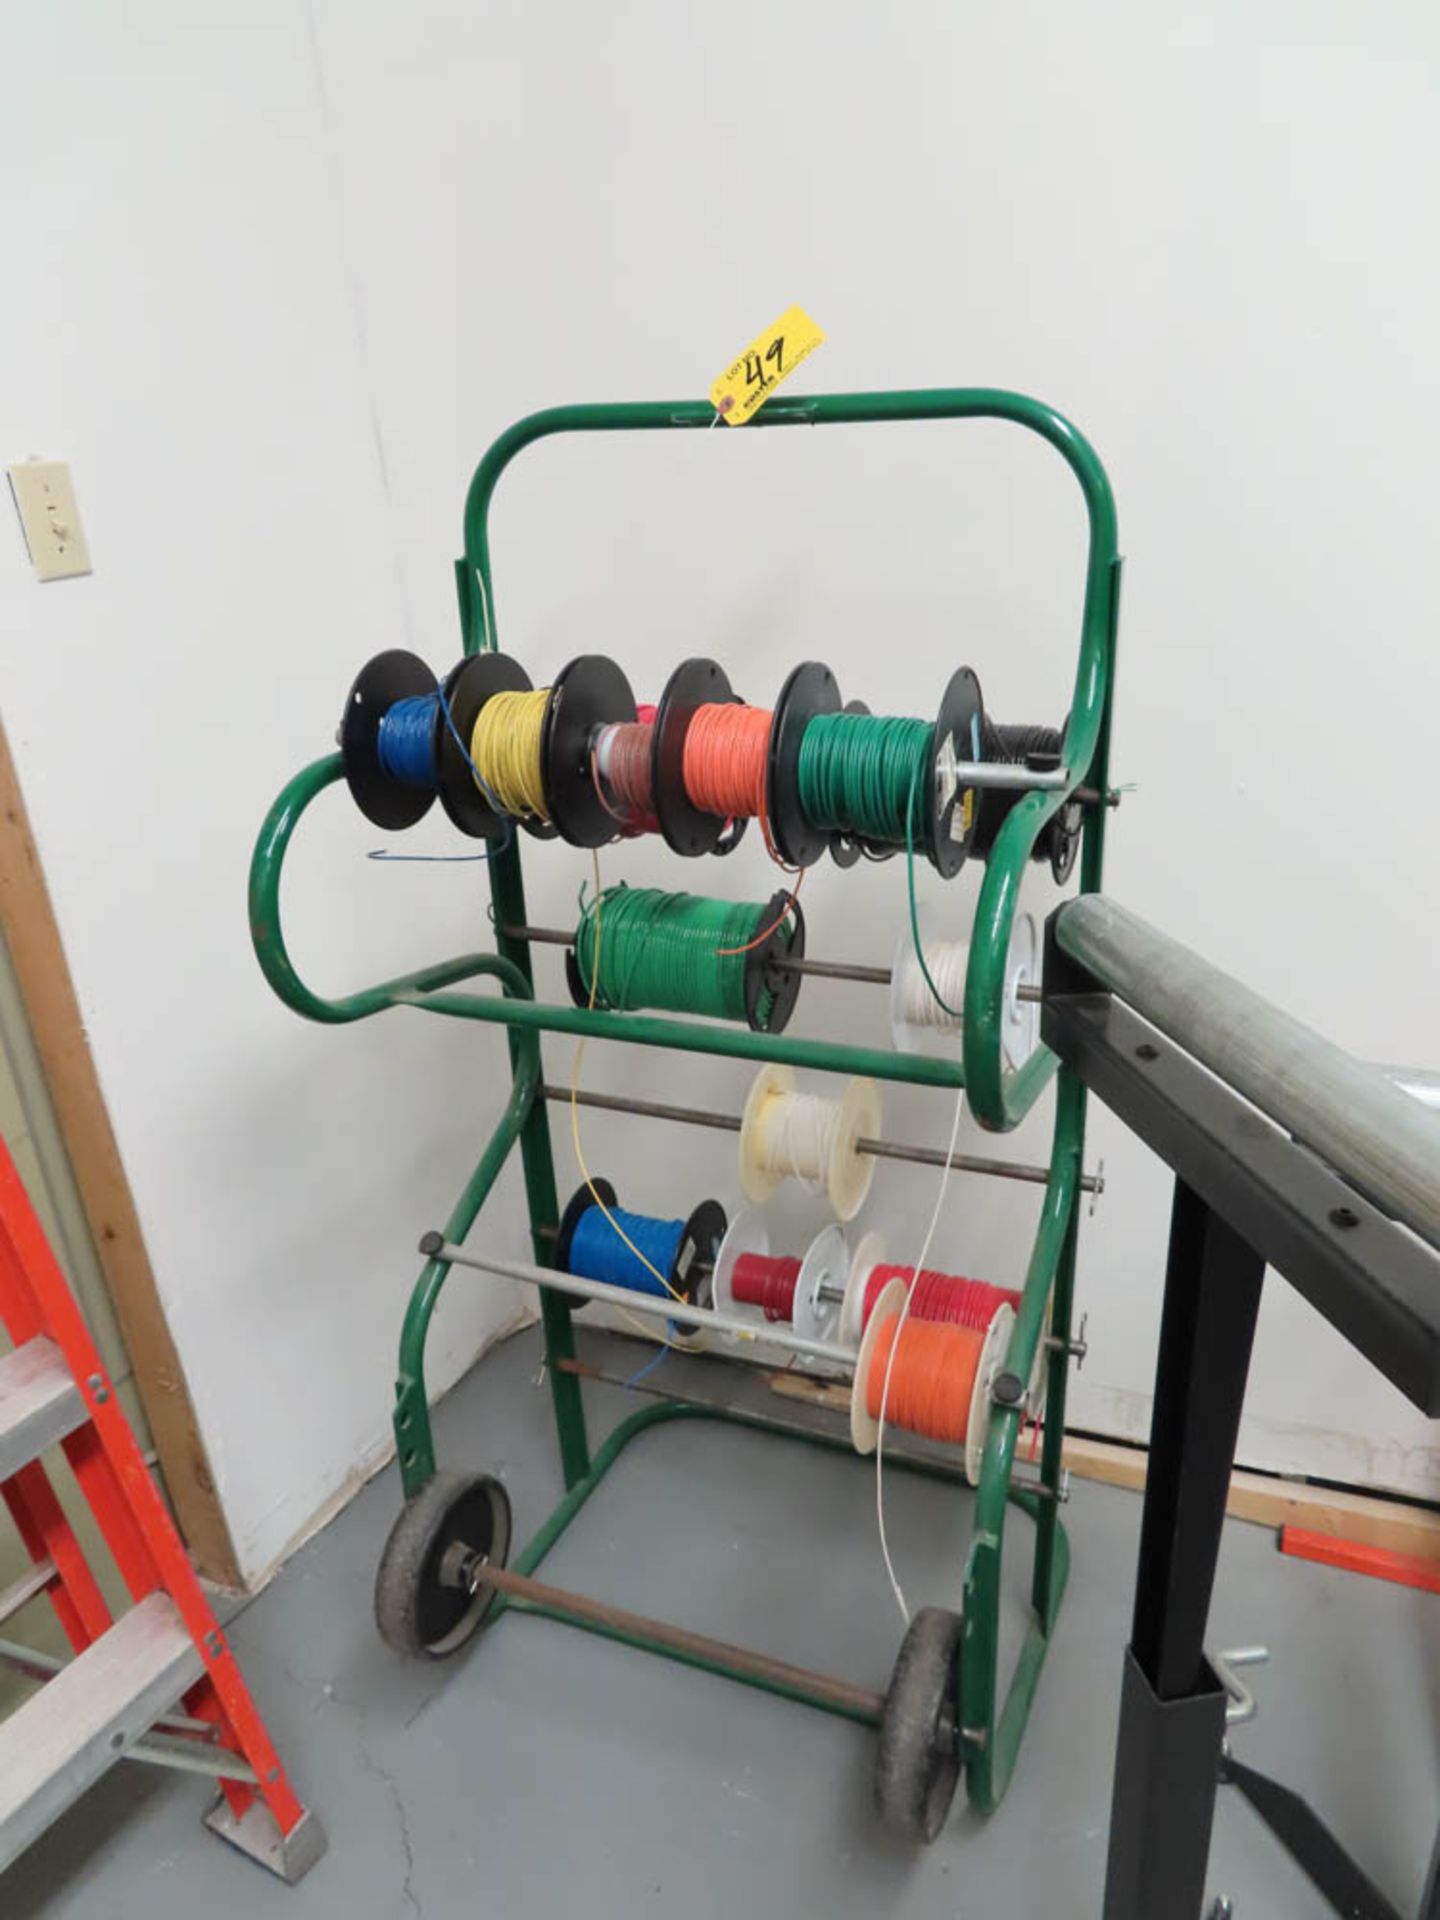 CART WITH WIRE SPOOLS